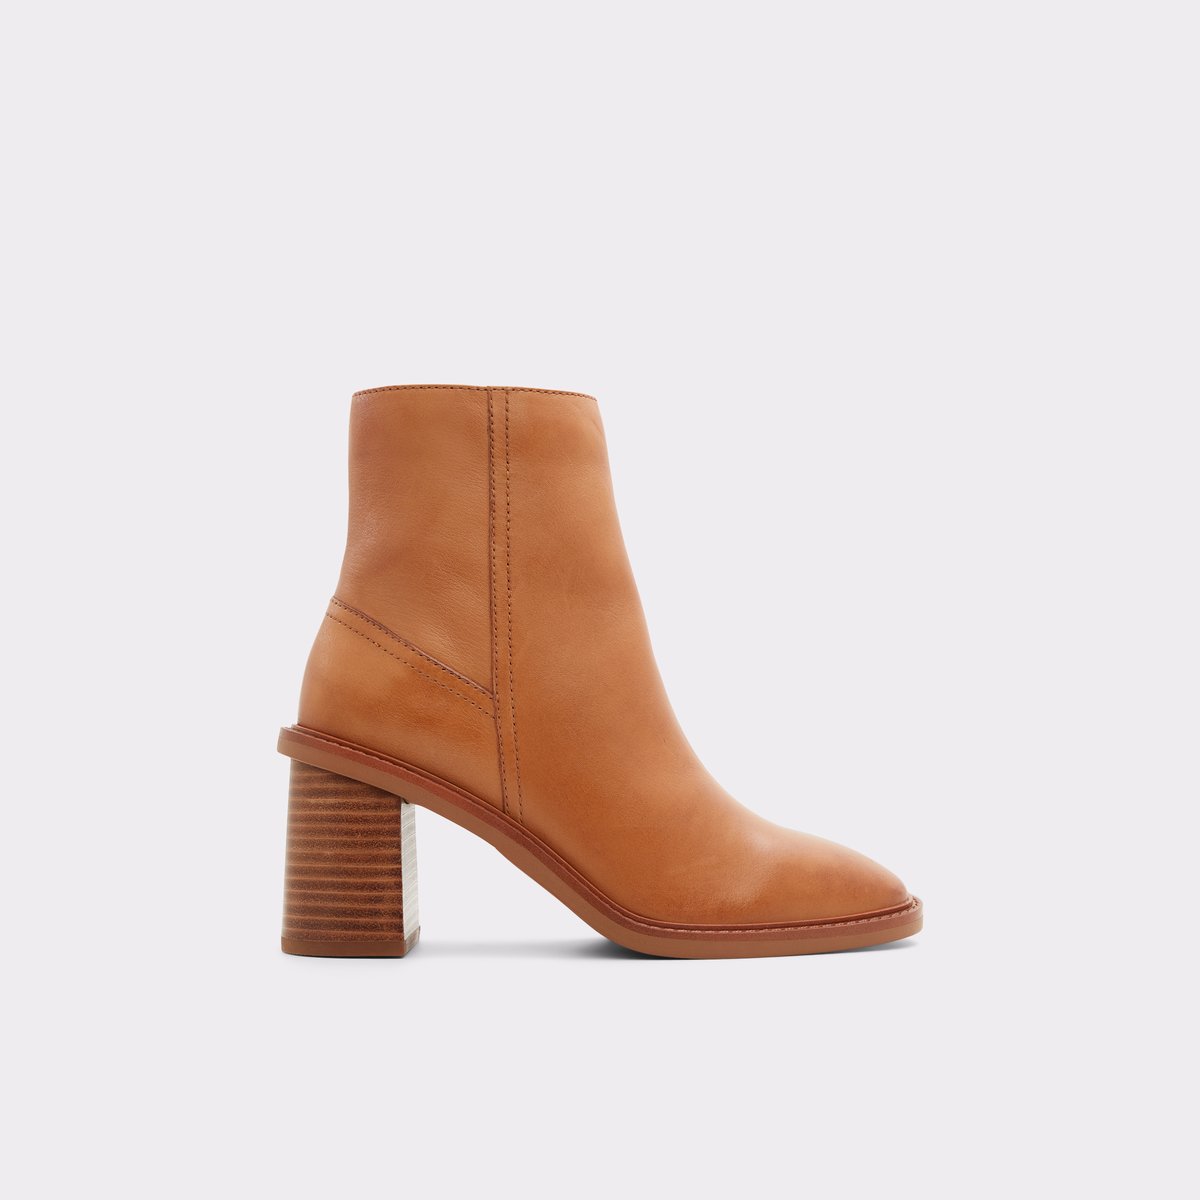 Filly Medium Brown Women's Ankle Boots & Booties | ALDO Canada